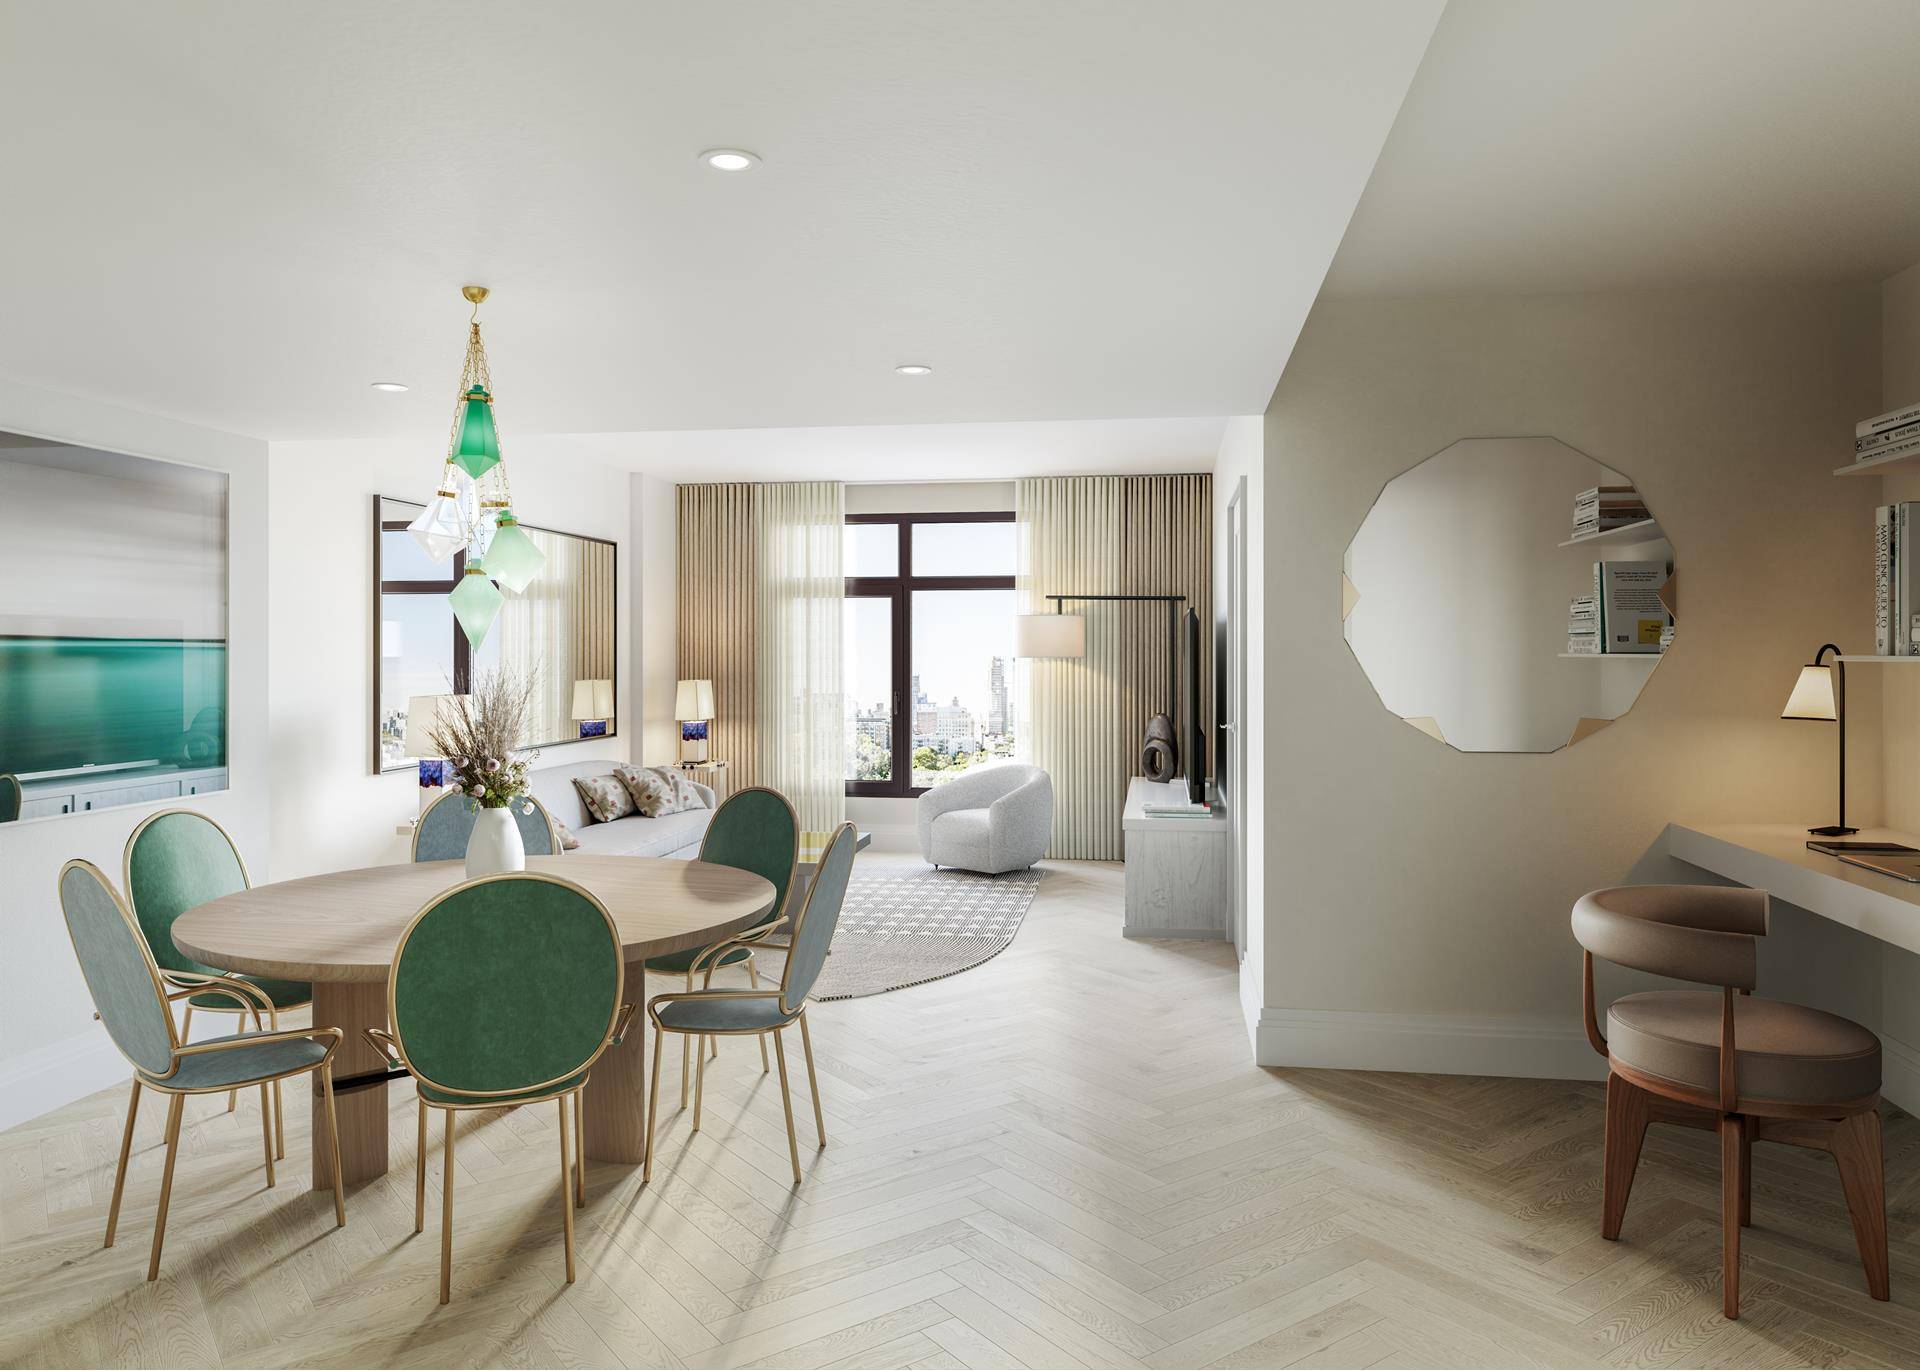 Sales Gallery Now Open By Appointment Introducing residence 8N at 300 West, an western facing one bedroom, one bathroom, offering a spacious living dining area that boasts custom White Oak ...